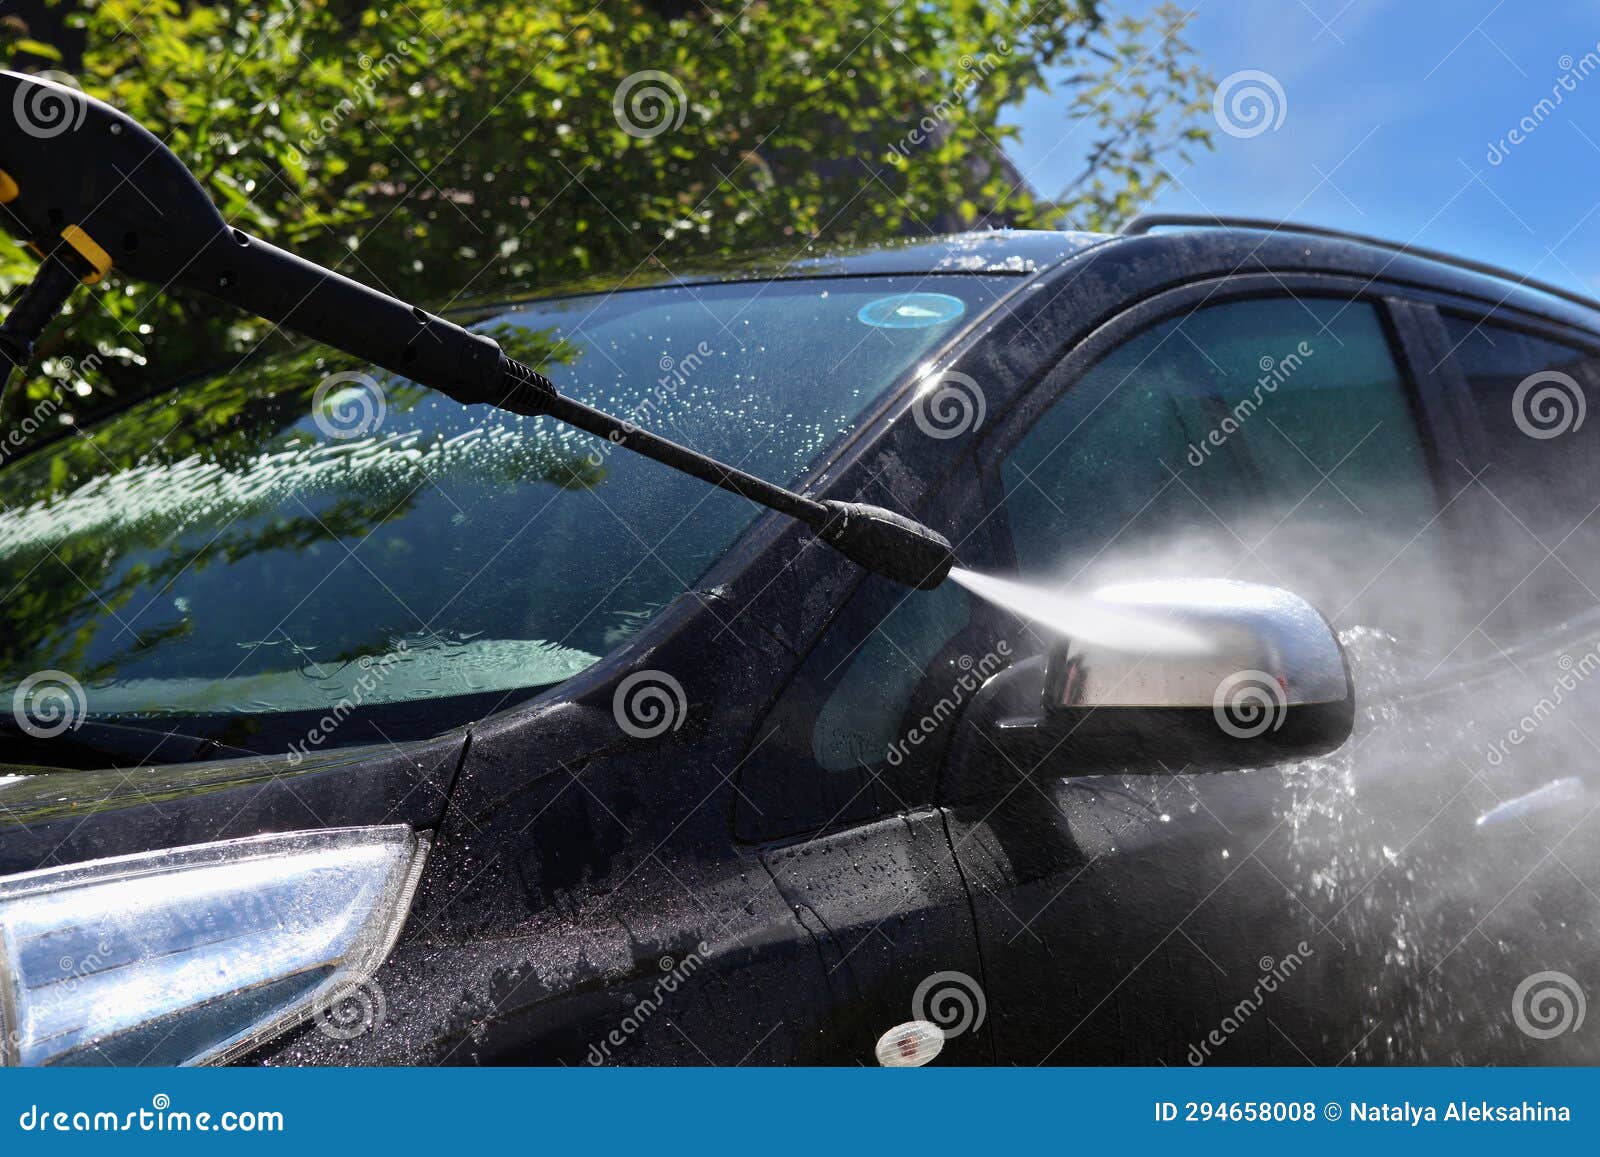 manual car wash with pressurized water